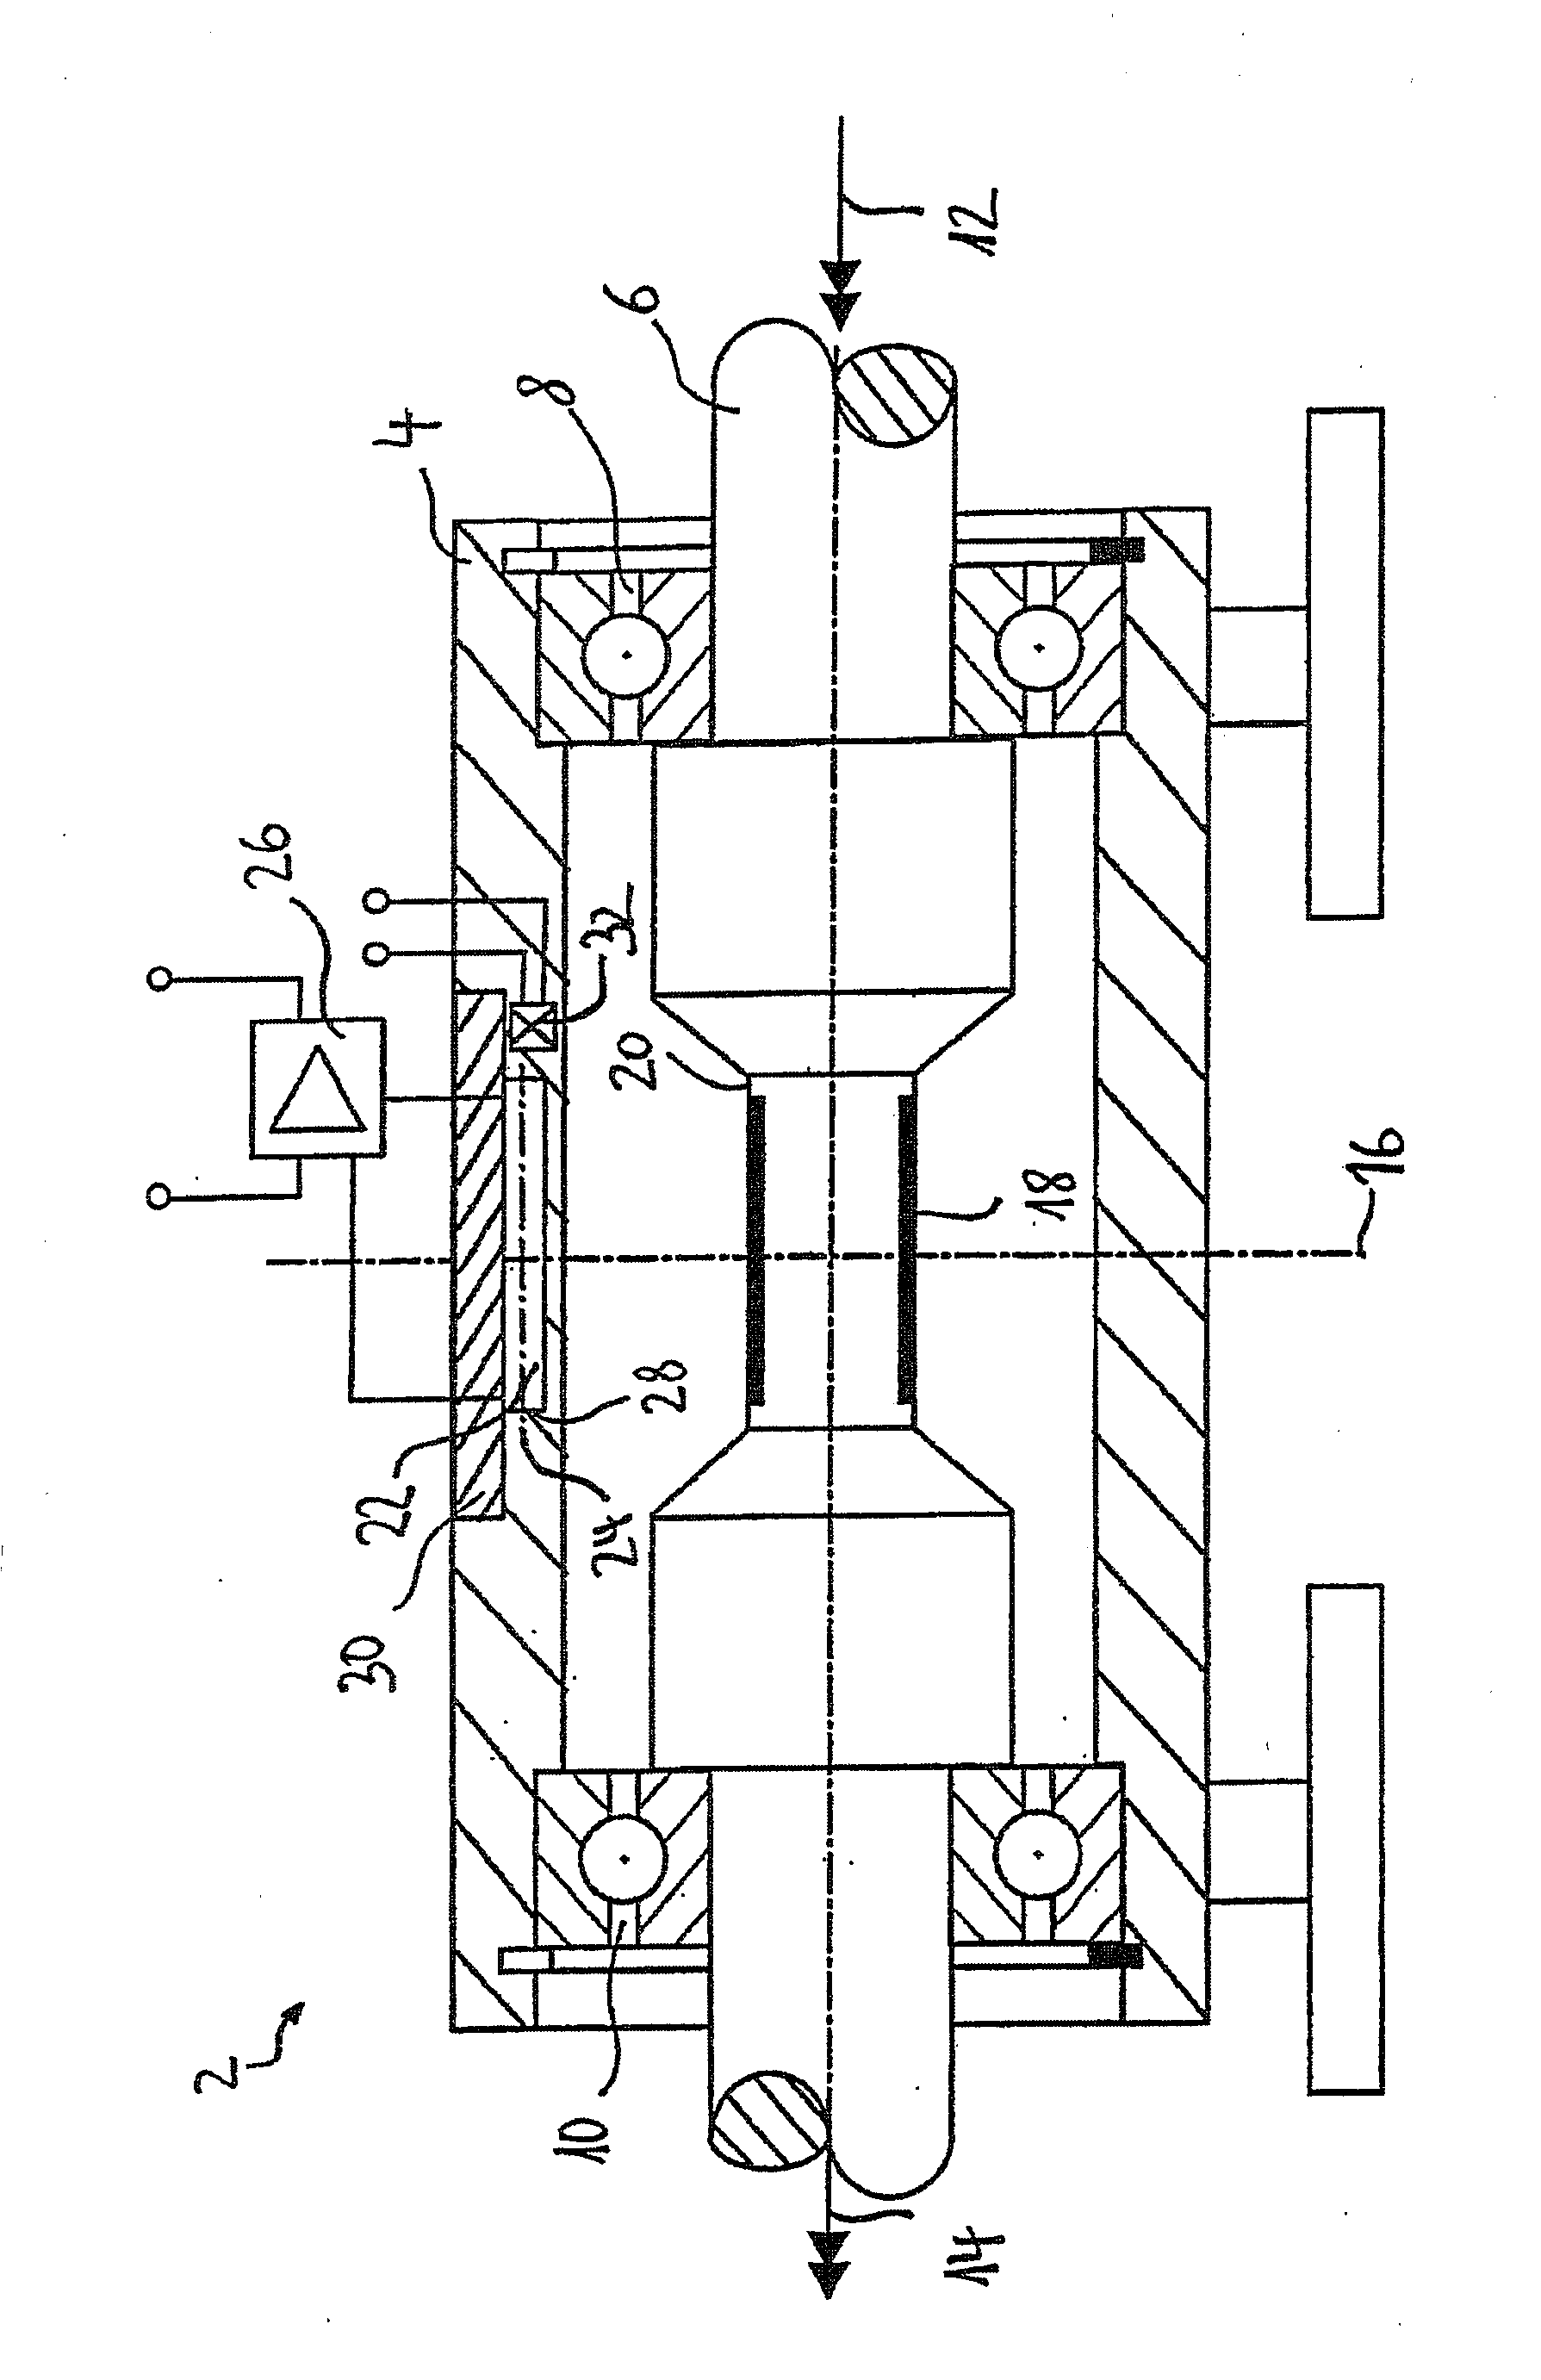 Device for transmitting torques